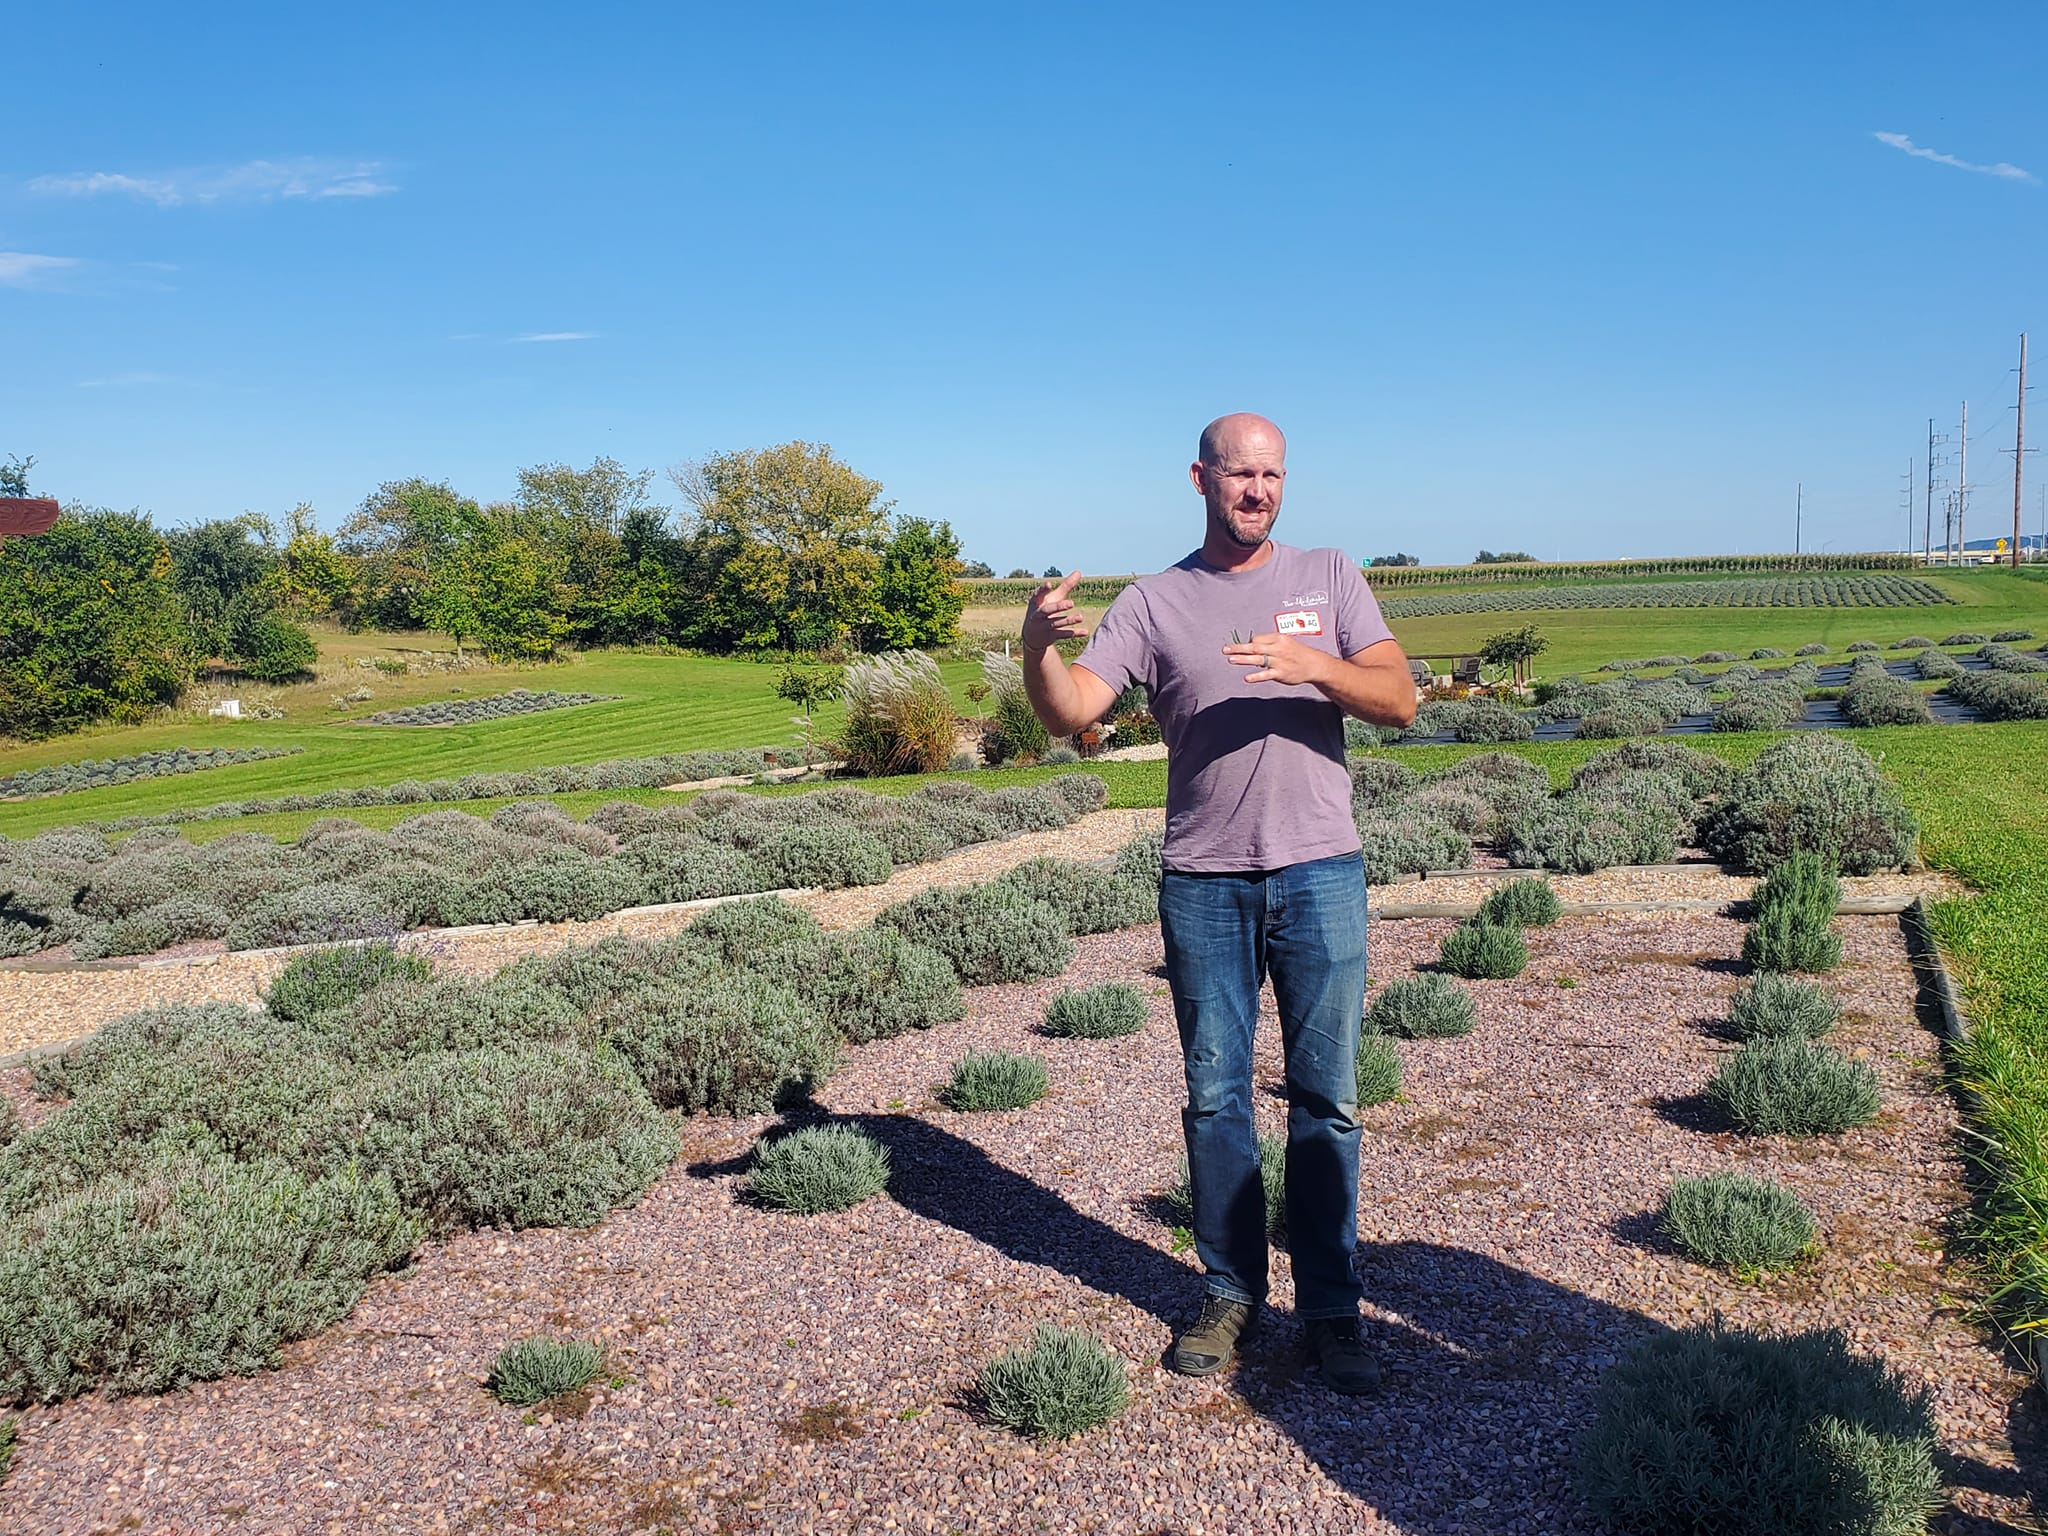 Lavender: More Than Just The Aroma